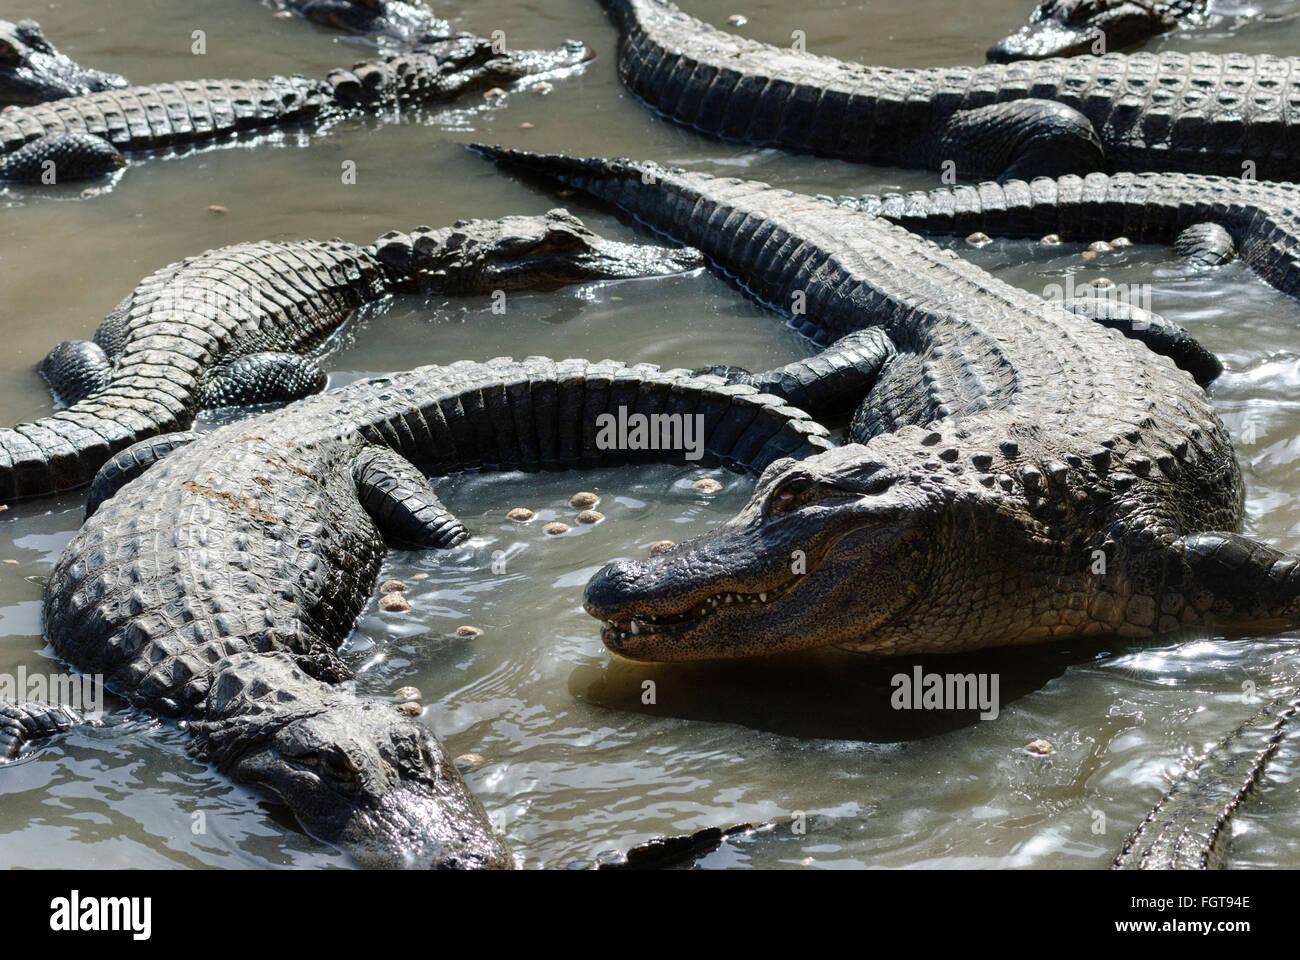 A group of common (American) alligators basking in the sun. Stock Photo